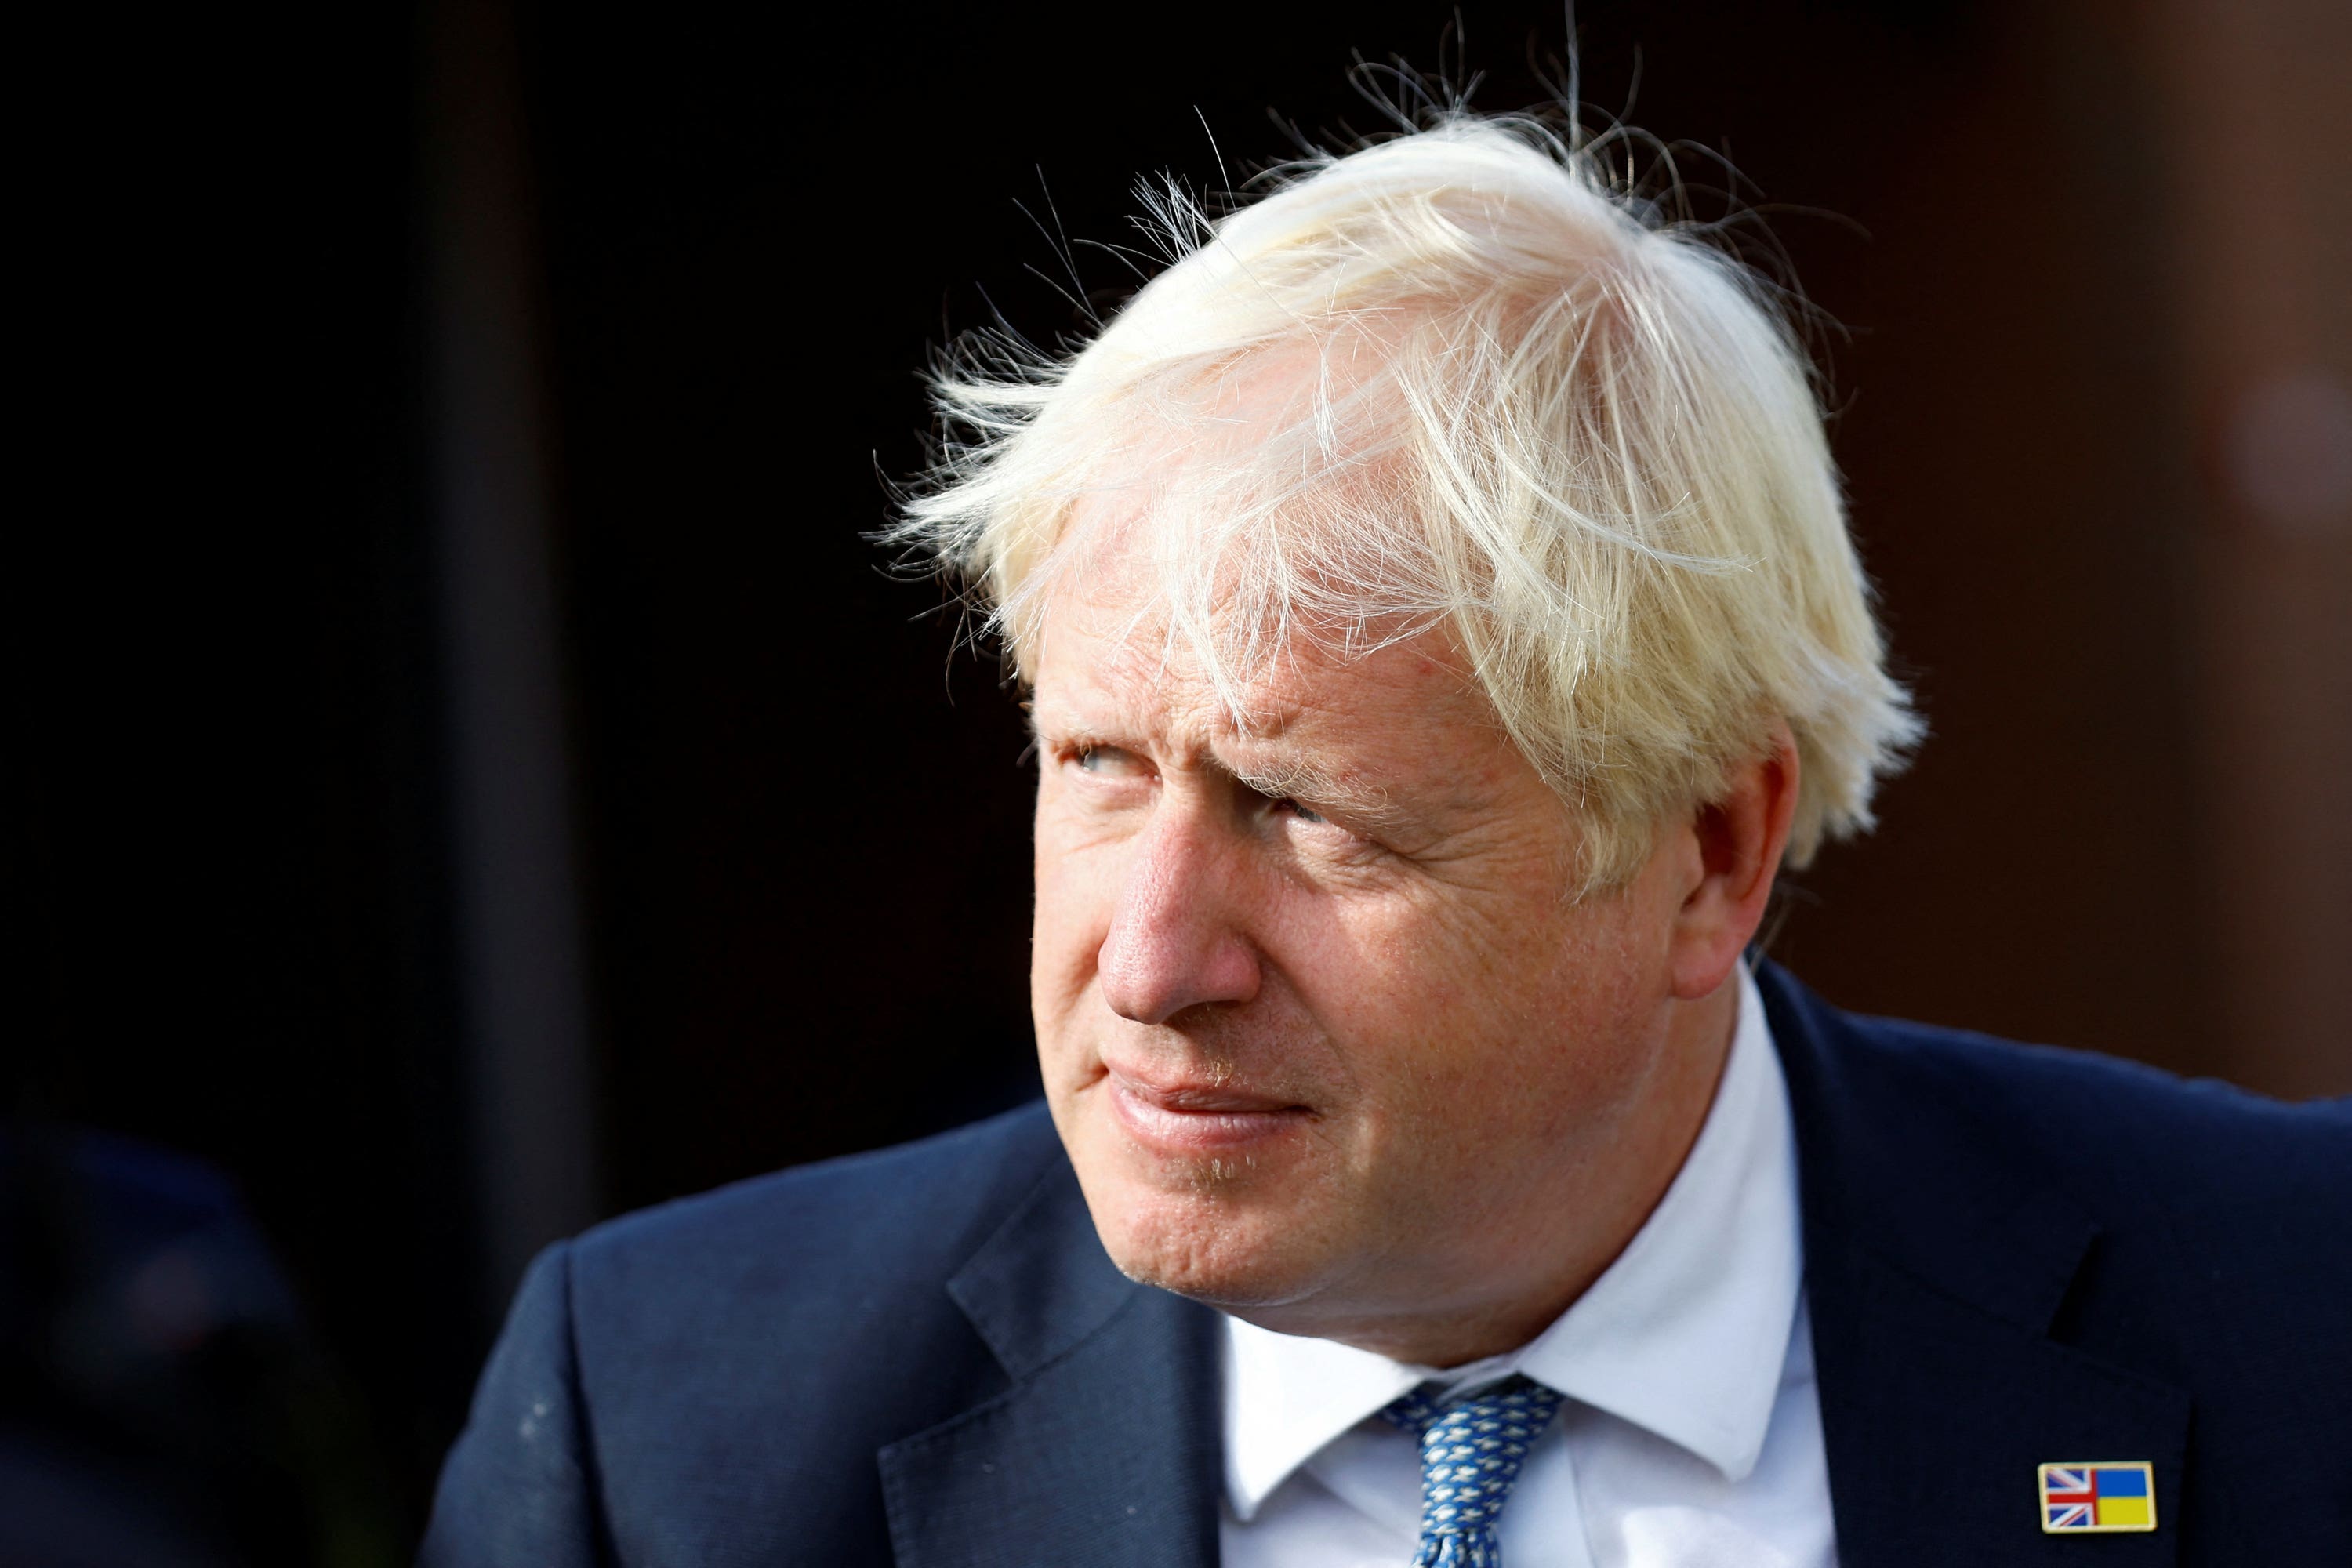 Boris Johnson told No 10 aides that Cummings was a ‘complete and utter liar’ Andrew Boyers/PA)